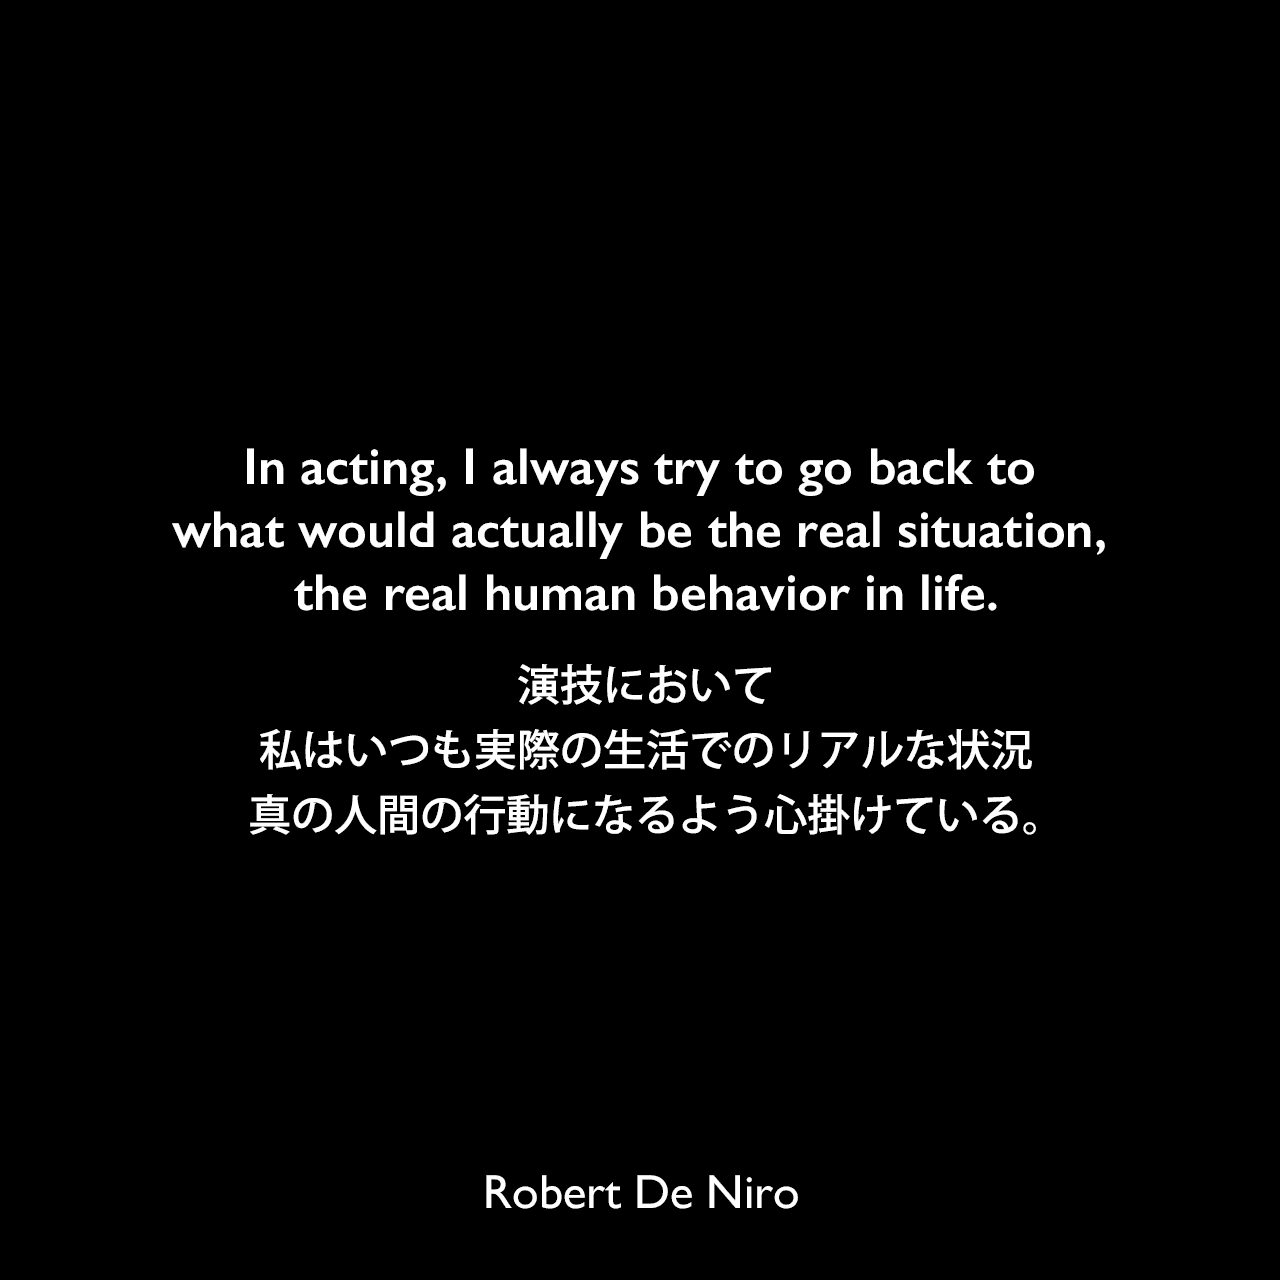 In acting, I always try to go back to what would actually be the real situation, the real human behavior in life.演技において、私はいつも実際の生活でのリアルな状況、真の人間の行動になるよう心掛けている。Robert De Niro